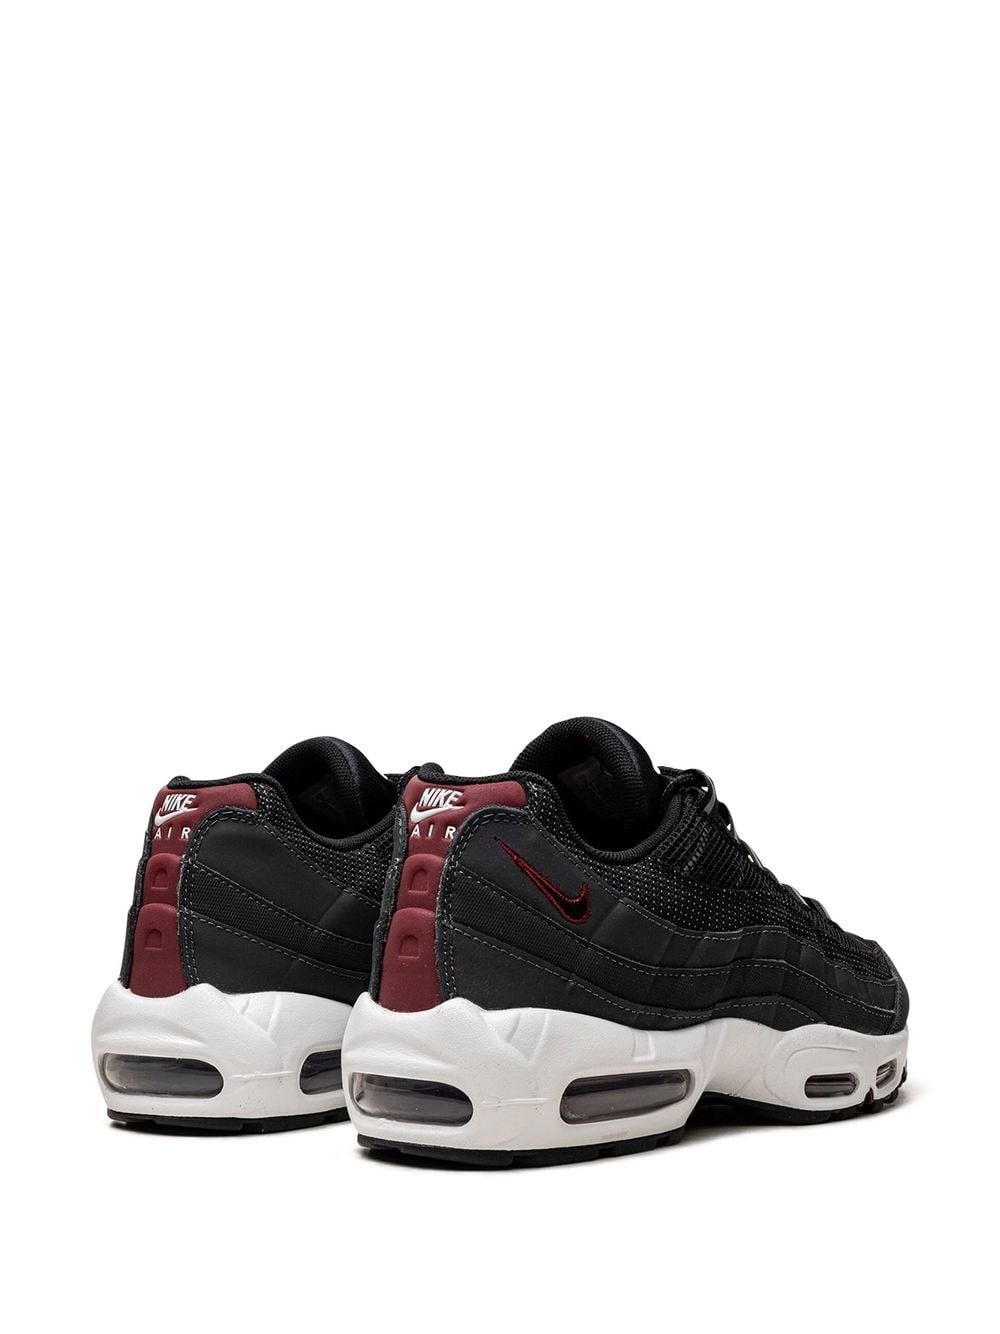 Air Max 95 "Anthracite/Team Red/Summit White" sneakers - 3